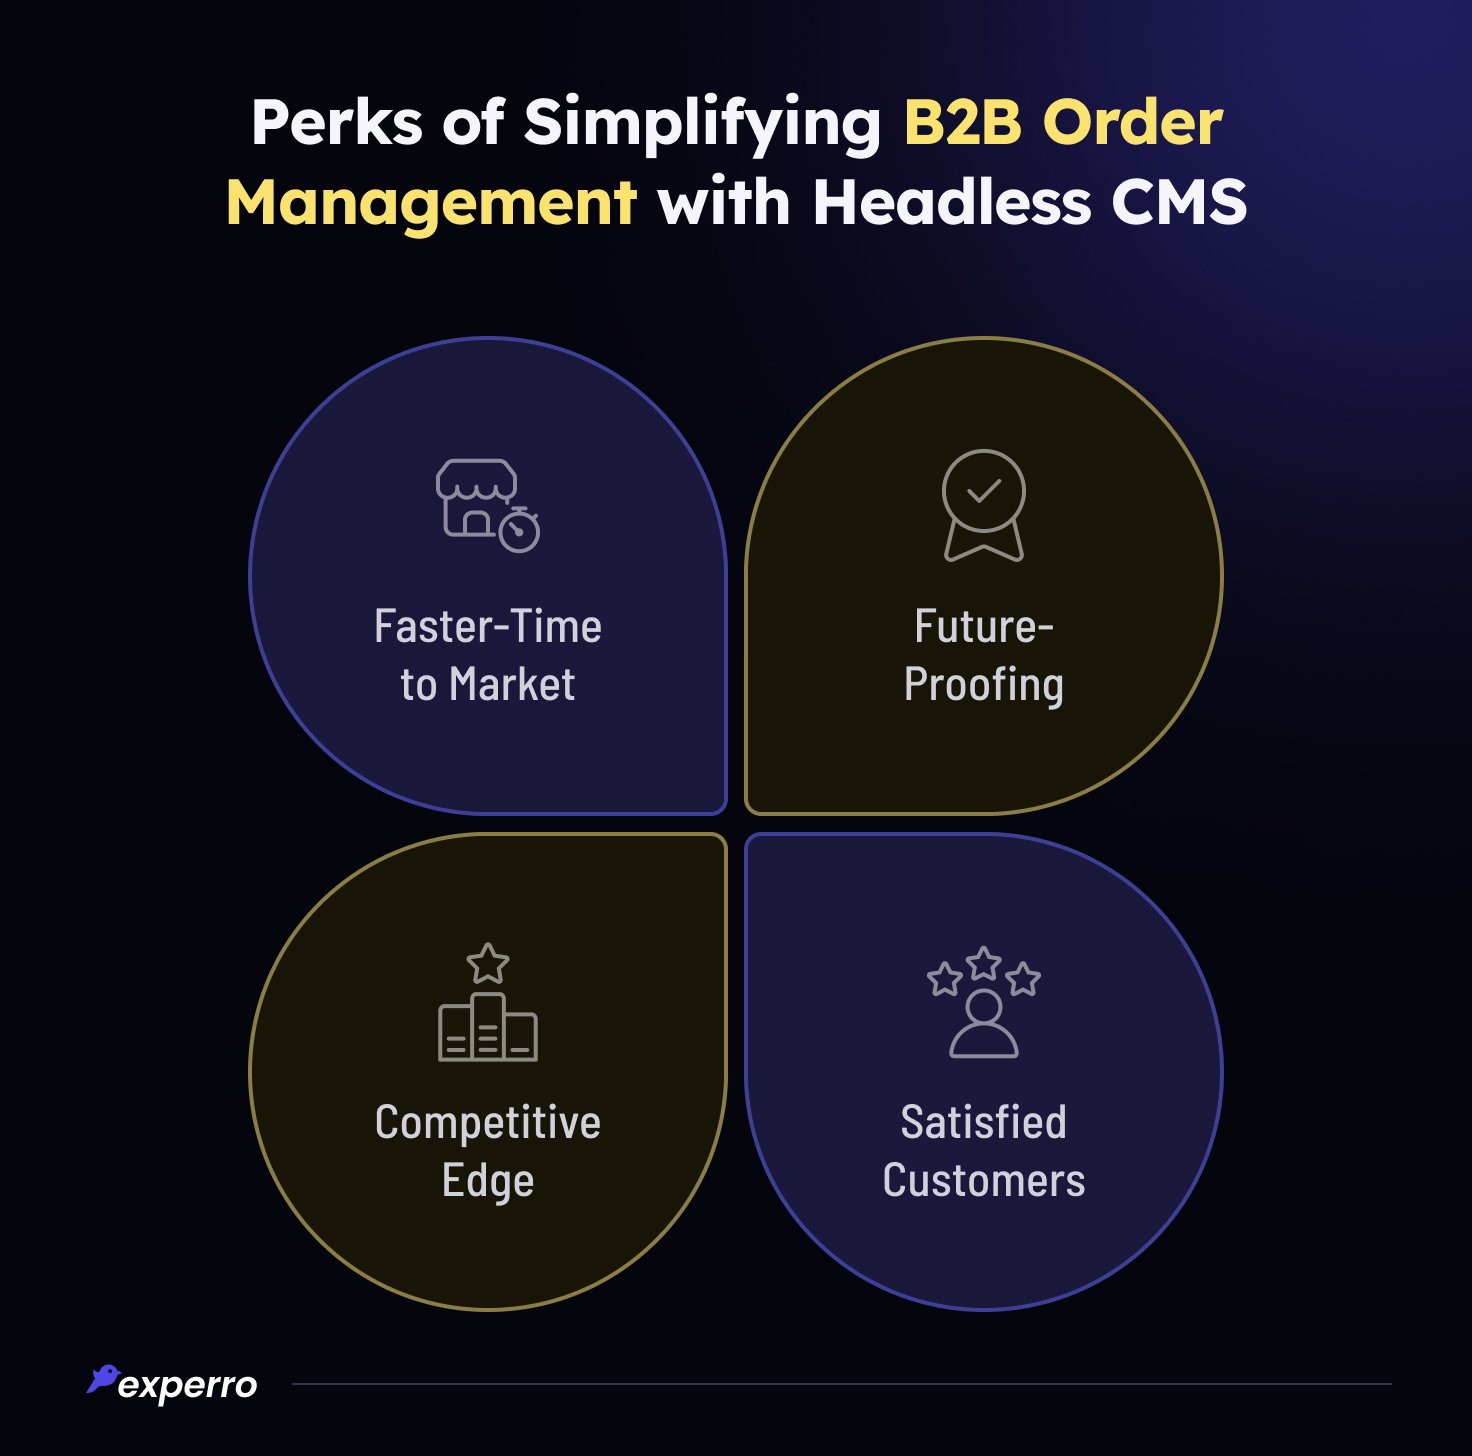 Benefits of B2B Order Management With Headless CMS